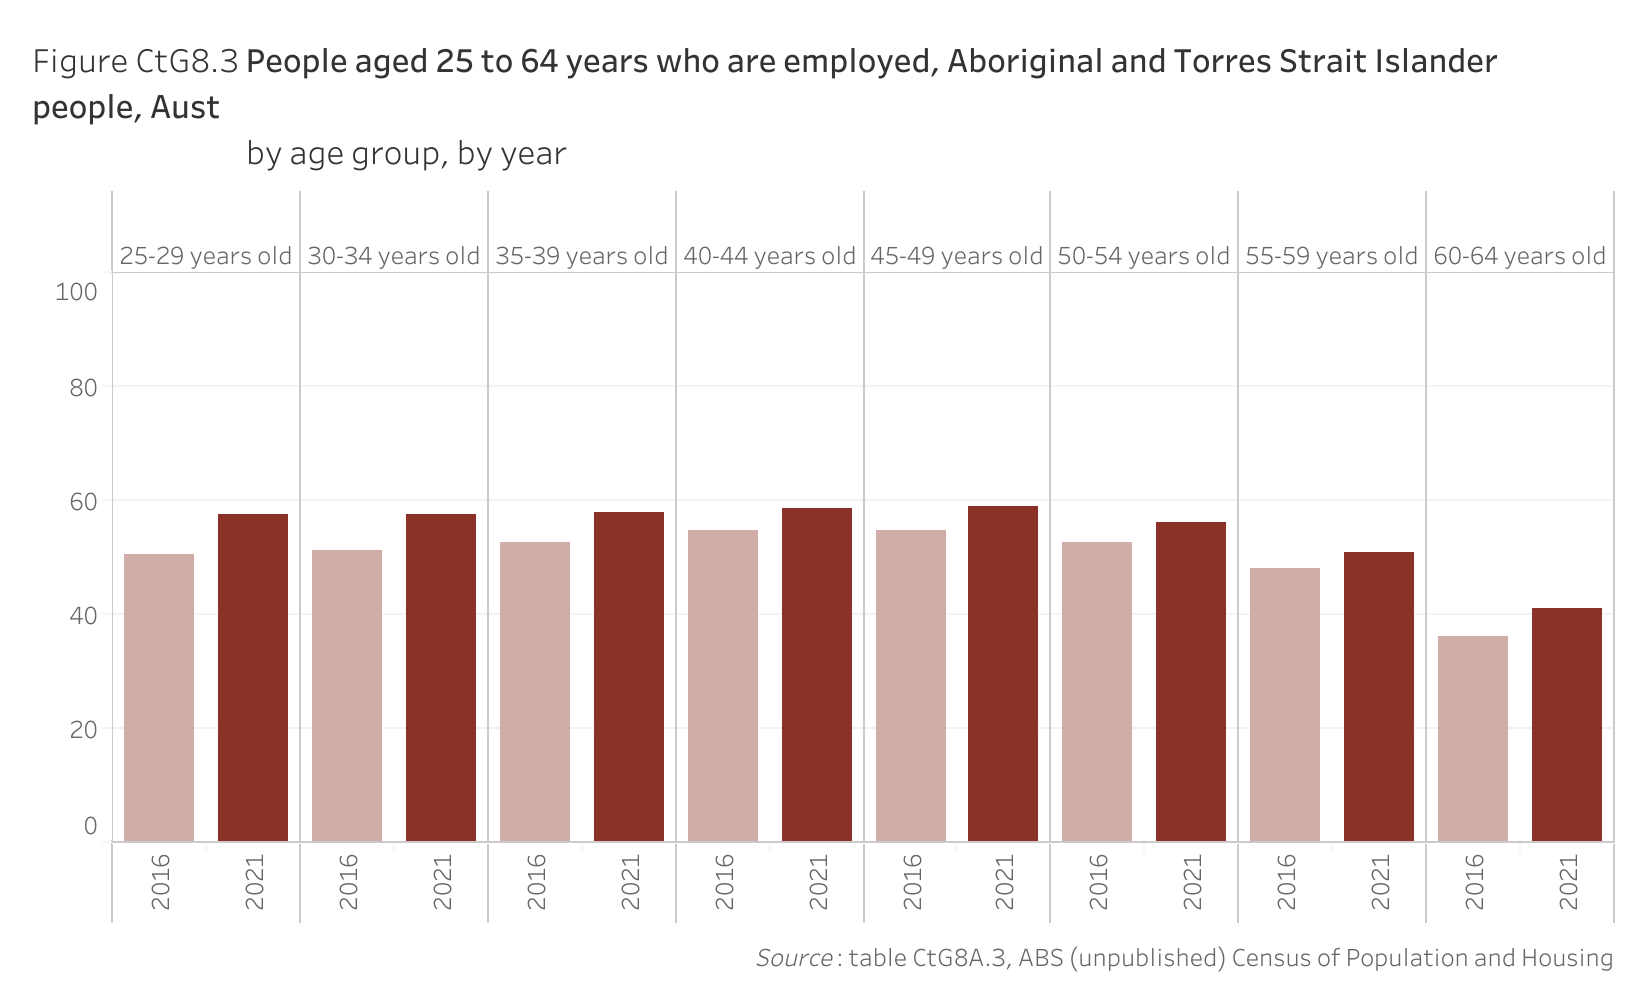 Figure CtG8.3 shows people aged 25 to 64 years who are employed, Aboriginal and Torres Strait Islander people, Australia, by age group, by year. More details can be found within the text near this image.